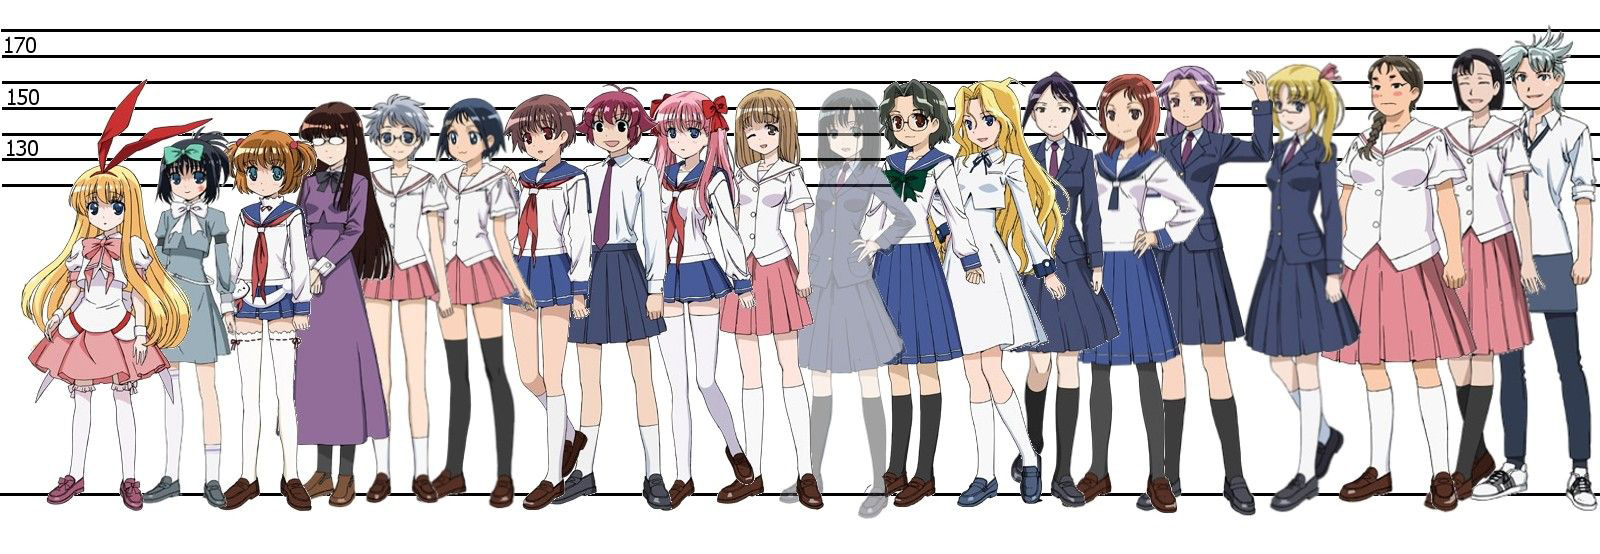 Old-School-Female-Anime-Characters-Height-Comparison-Chart